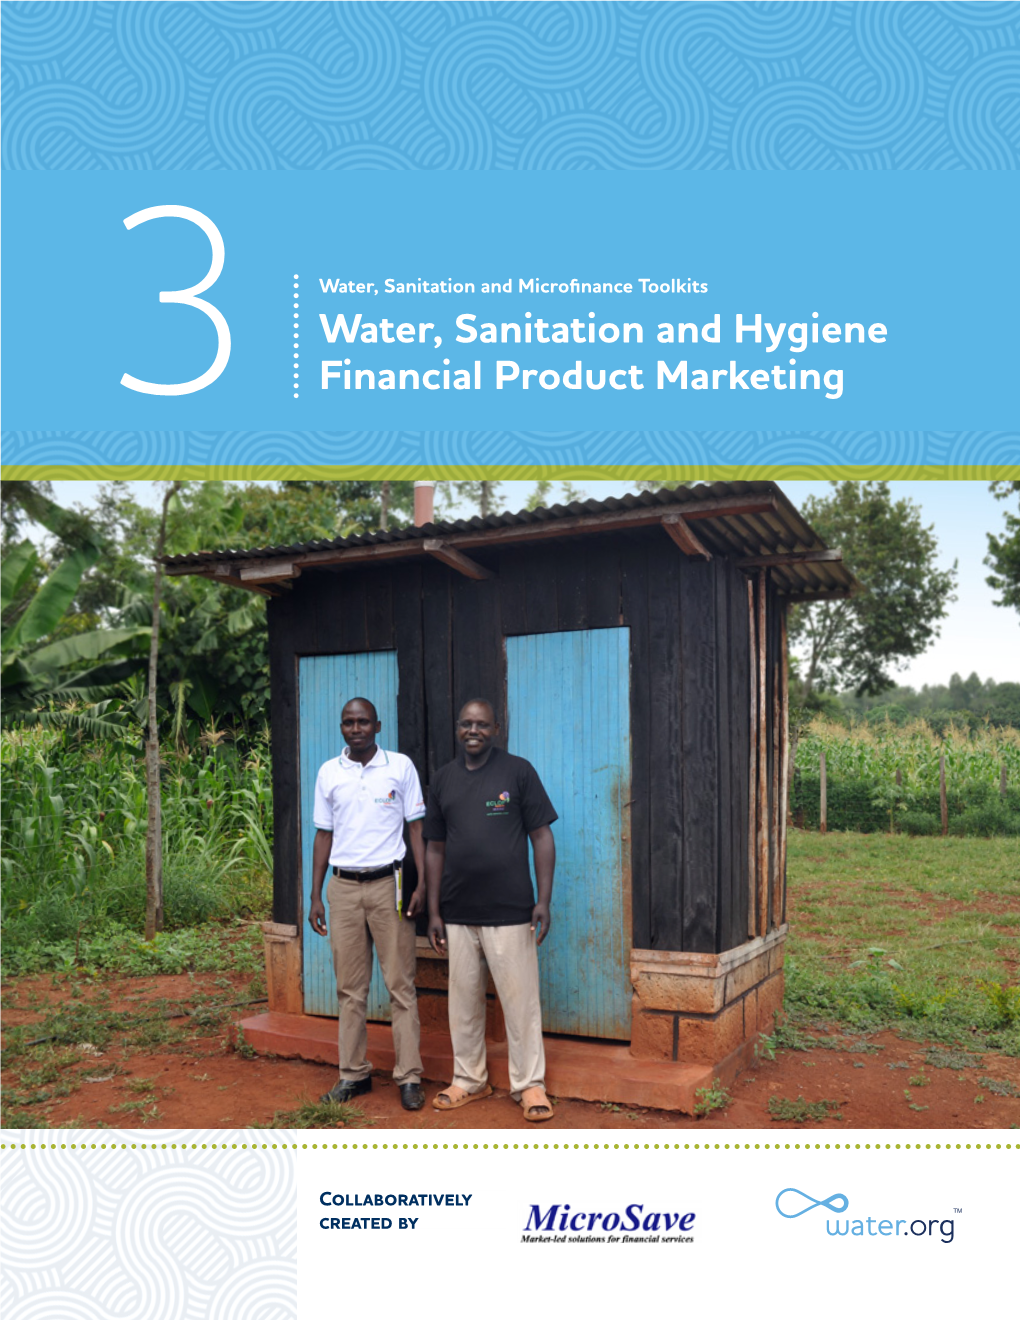 3 Water, Sanitation and Hygiene Financial Product Marketing